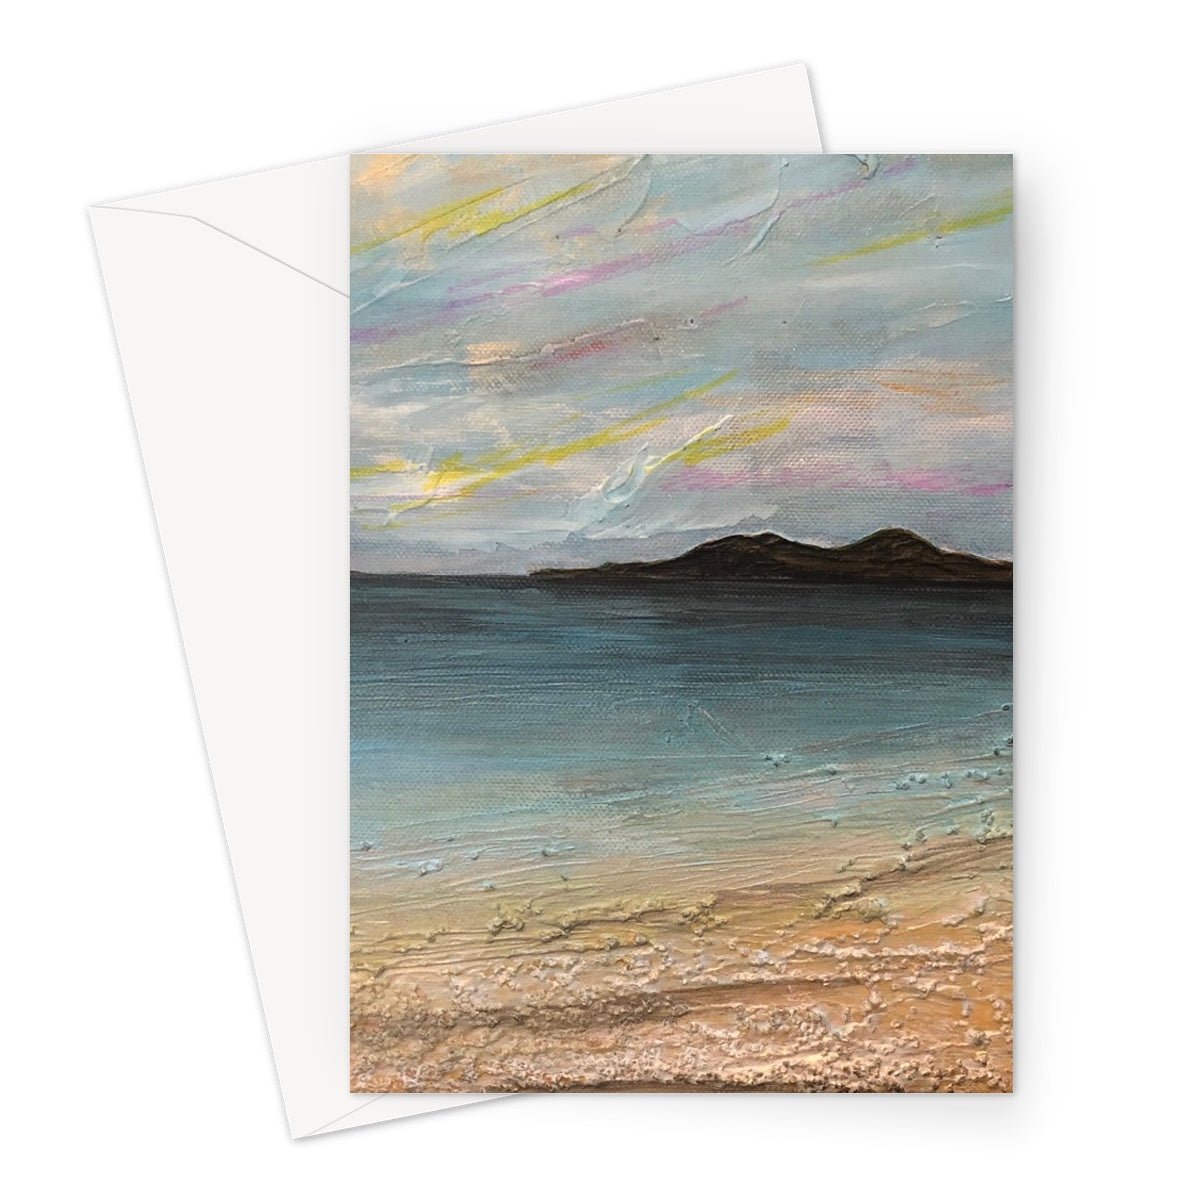 Garrynamonie Beach South Uist Art Gifts Greeting Card-Greetings Cards-Hebridean Islands Art Gallery-A5 Portrait-1 Card-Paintings, Prints, Homeware, Art Gifts From Scotland By Scottish Artist Kevin Hunter